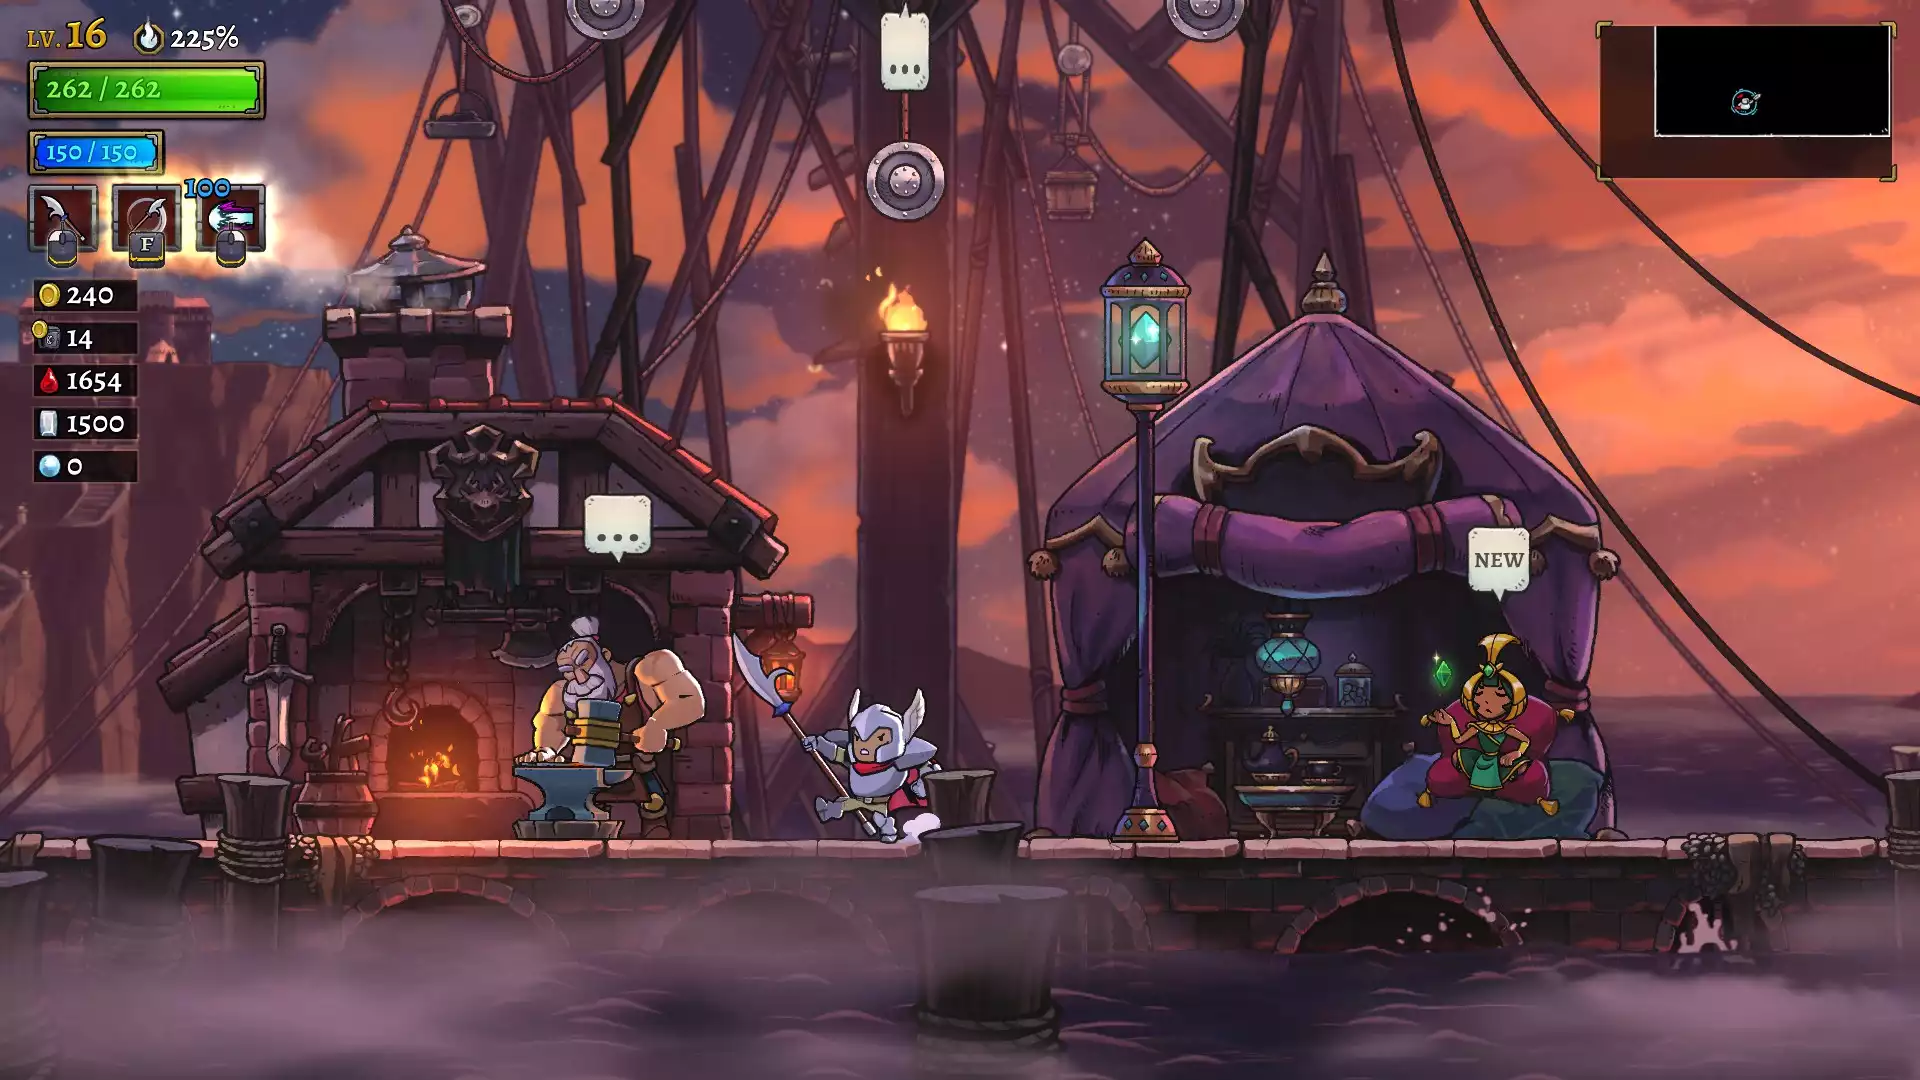 Here's how you can access all six biomes in Rogue Legacy 2